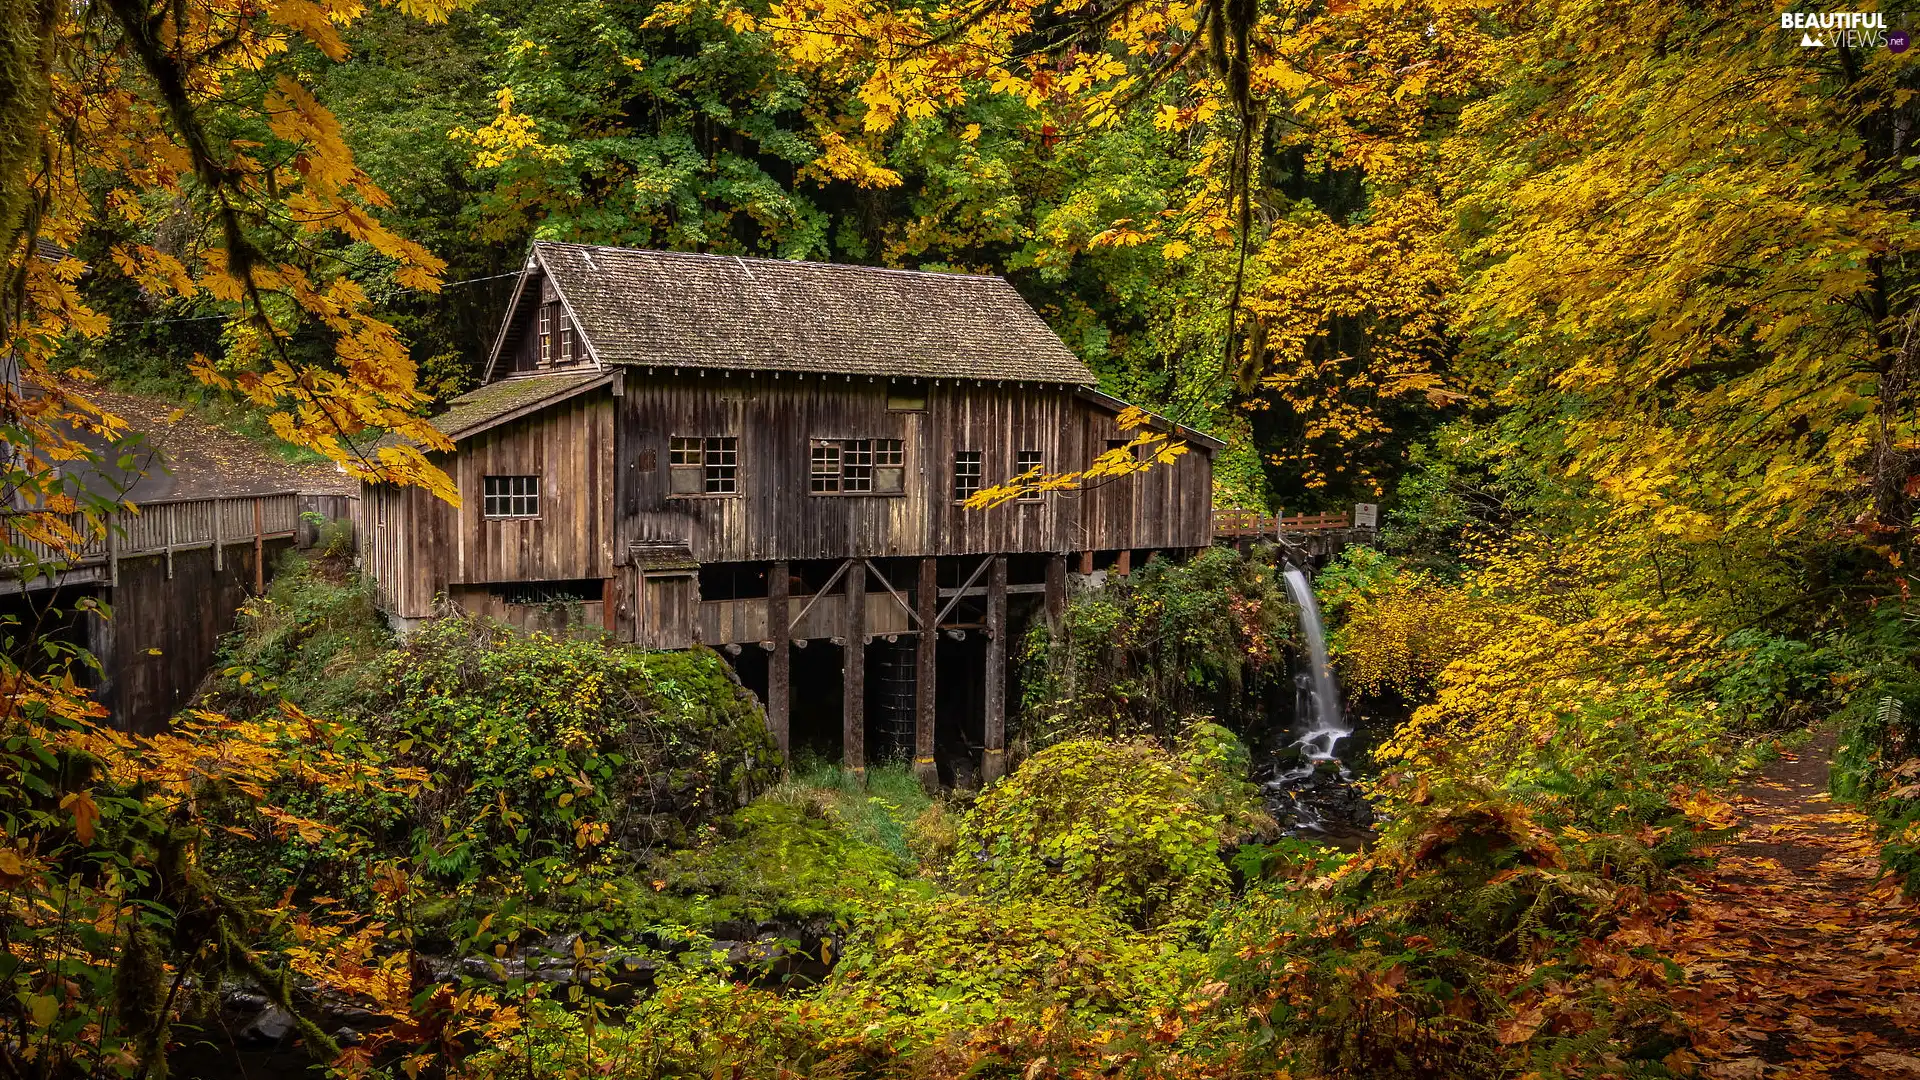 Cedar Creek Mill Grist Mill, autumn, River, trees, Washington State, The United States, forest, Woodland, viewes